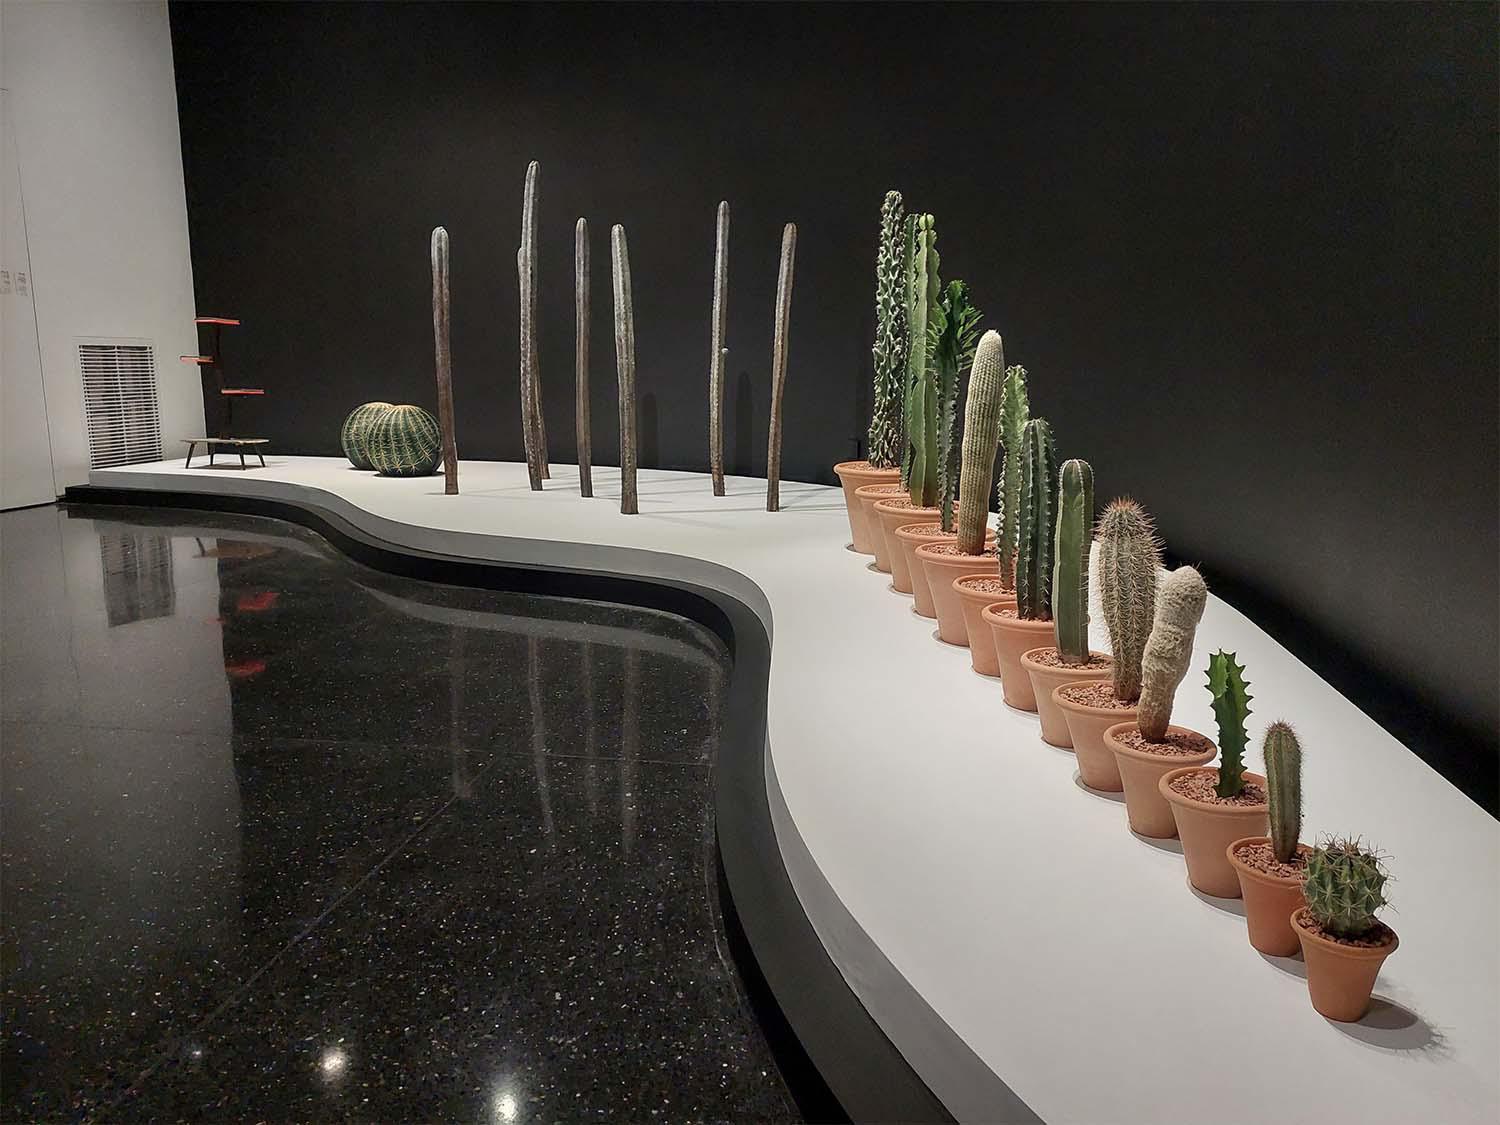 Cacti in ascendance next to the lightly disordered artwork of German artist Katinka Bock